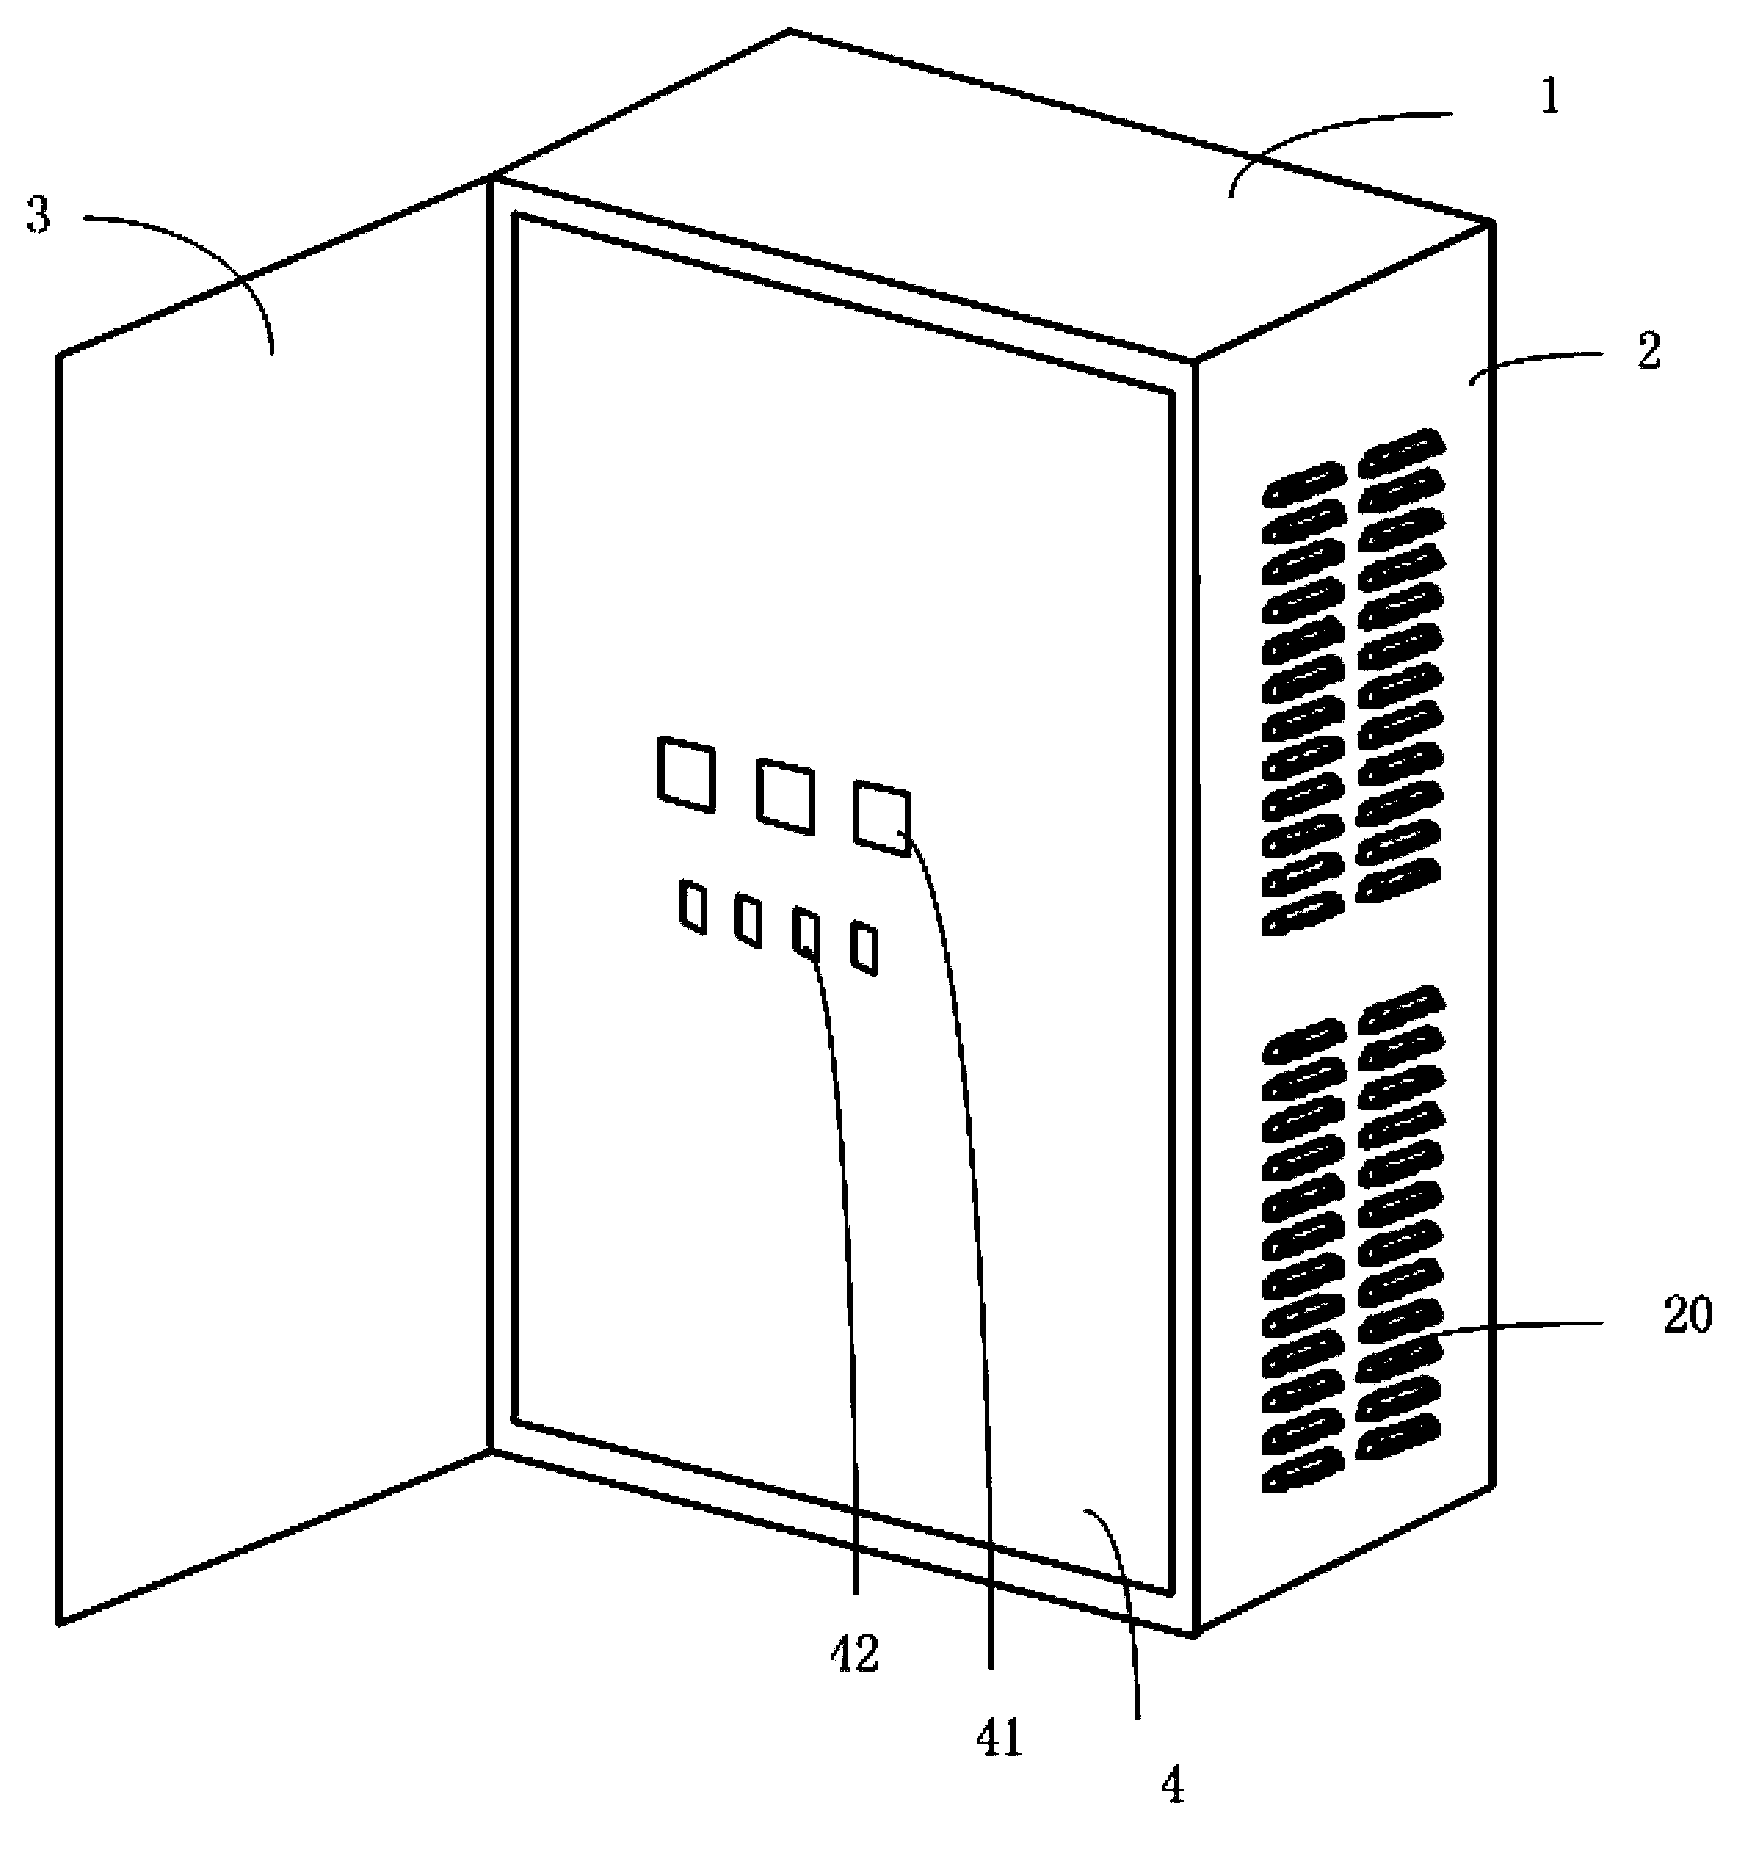 An improved power distribution box